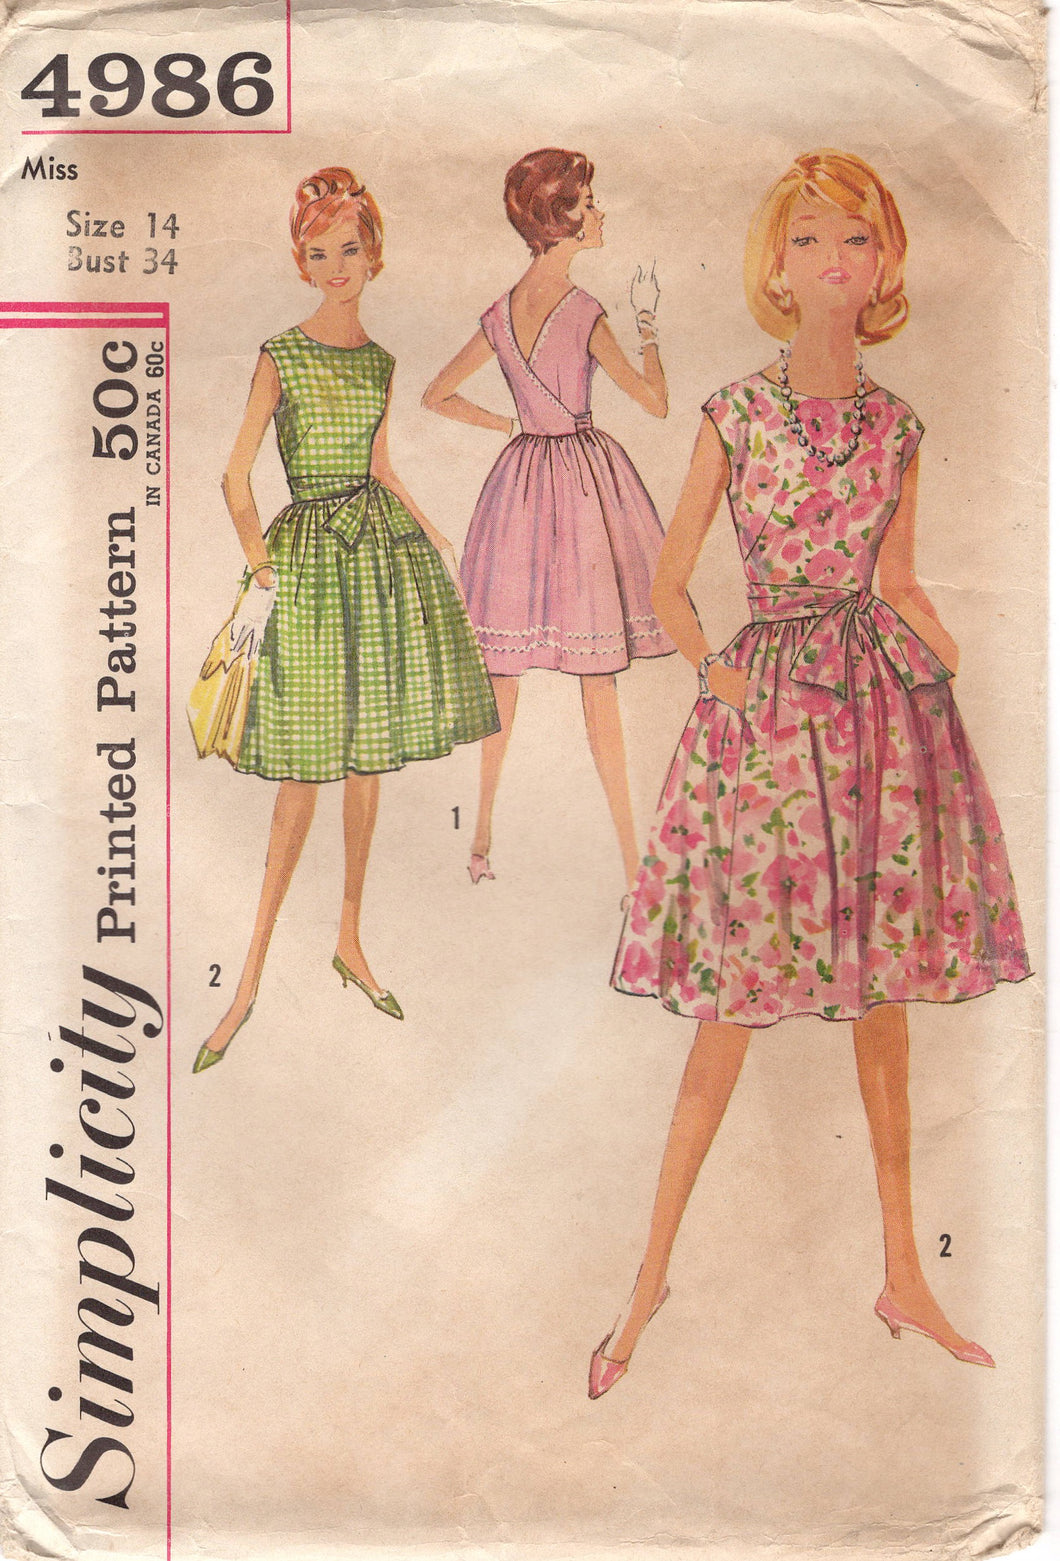 1960's Simplicity Back Wrapped Dress Pattern with High Neckline - Bust 34